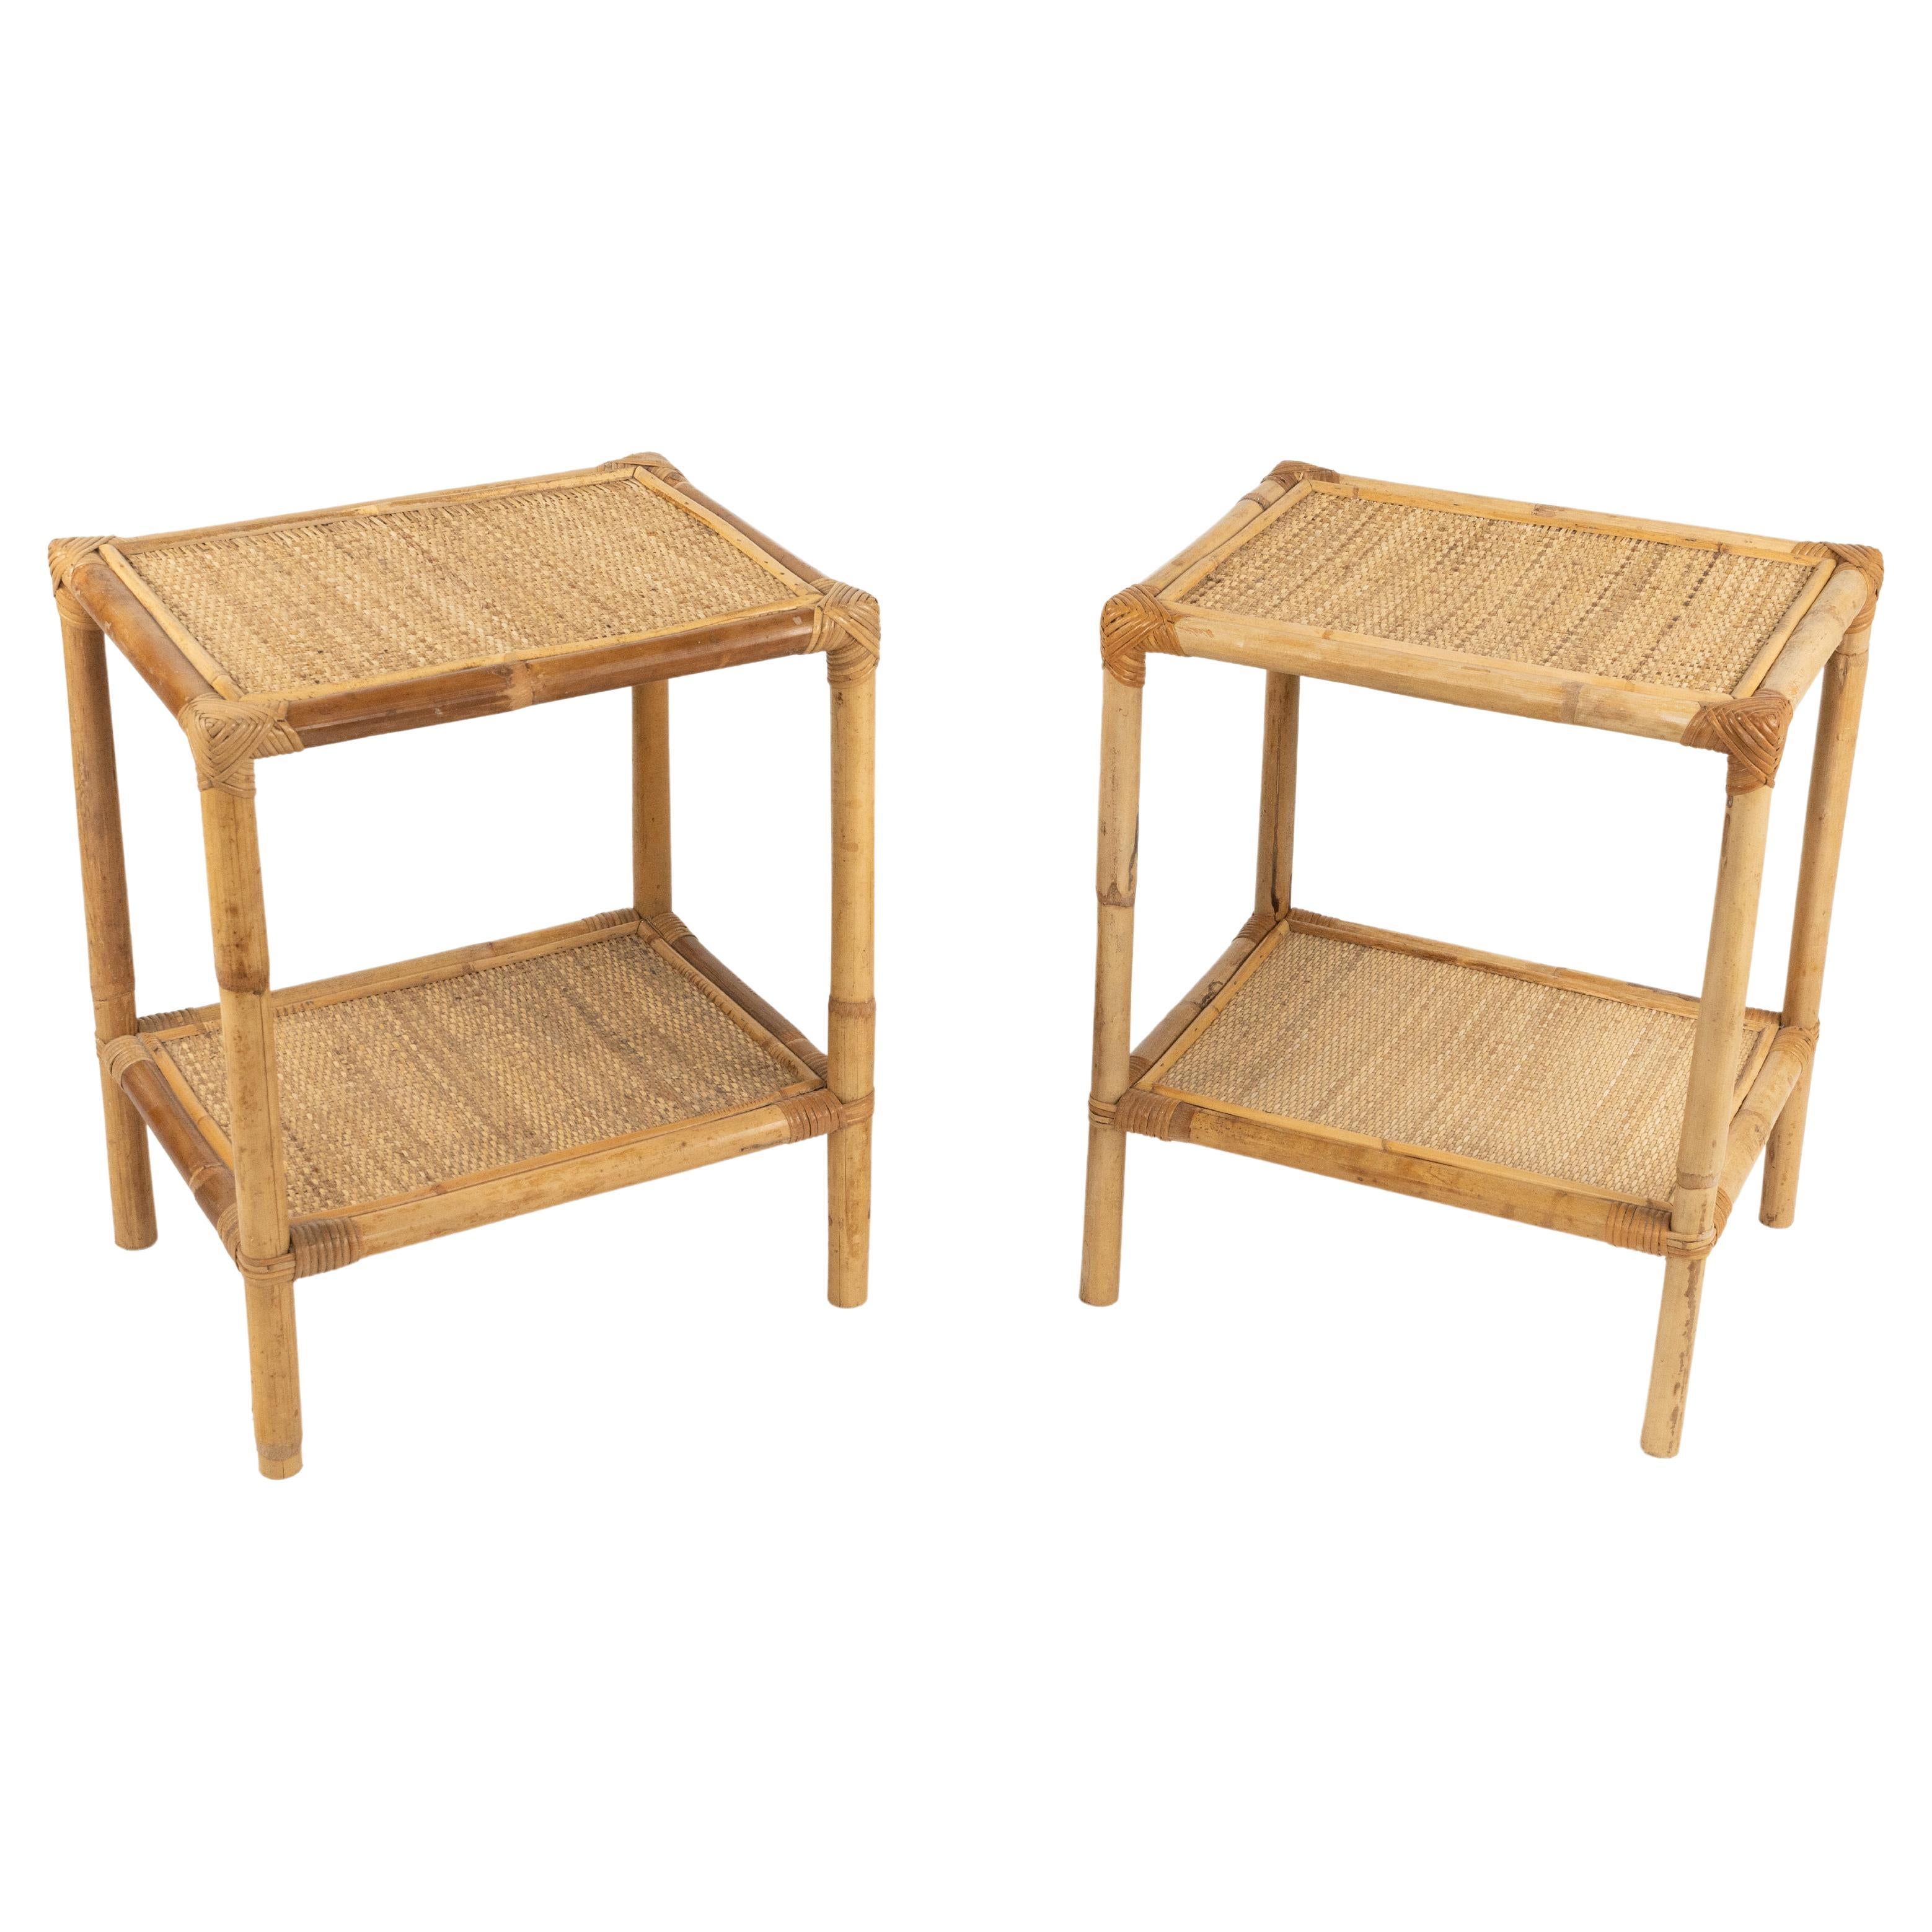 Midcentury Pair of Bed Side Tables in Bamboo, Rattan & Wicker, Italy 1970s For Sale